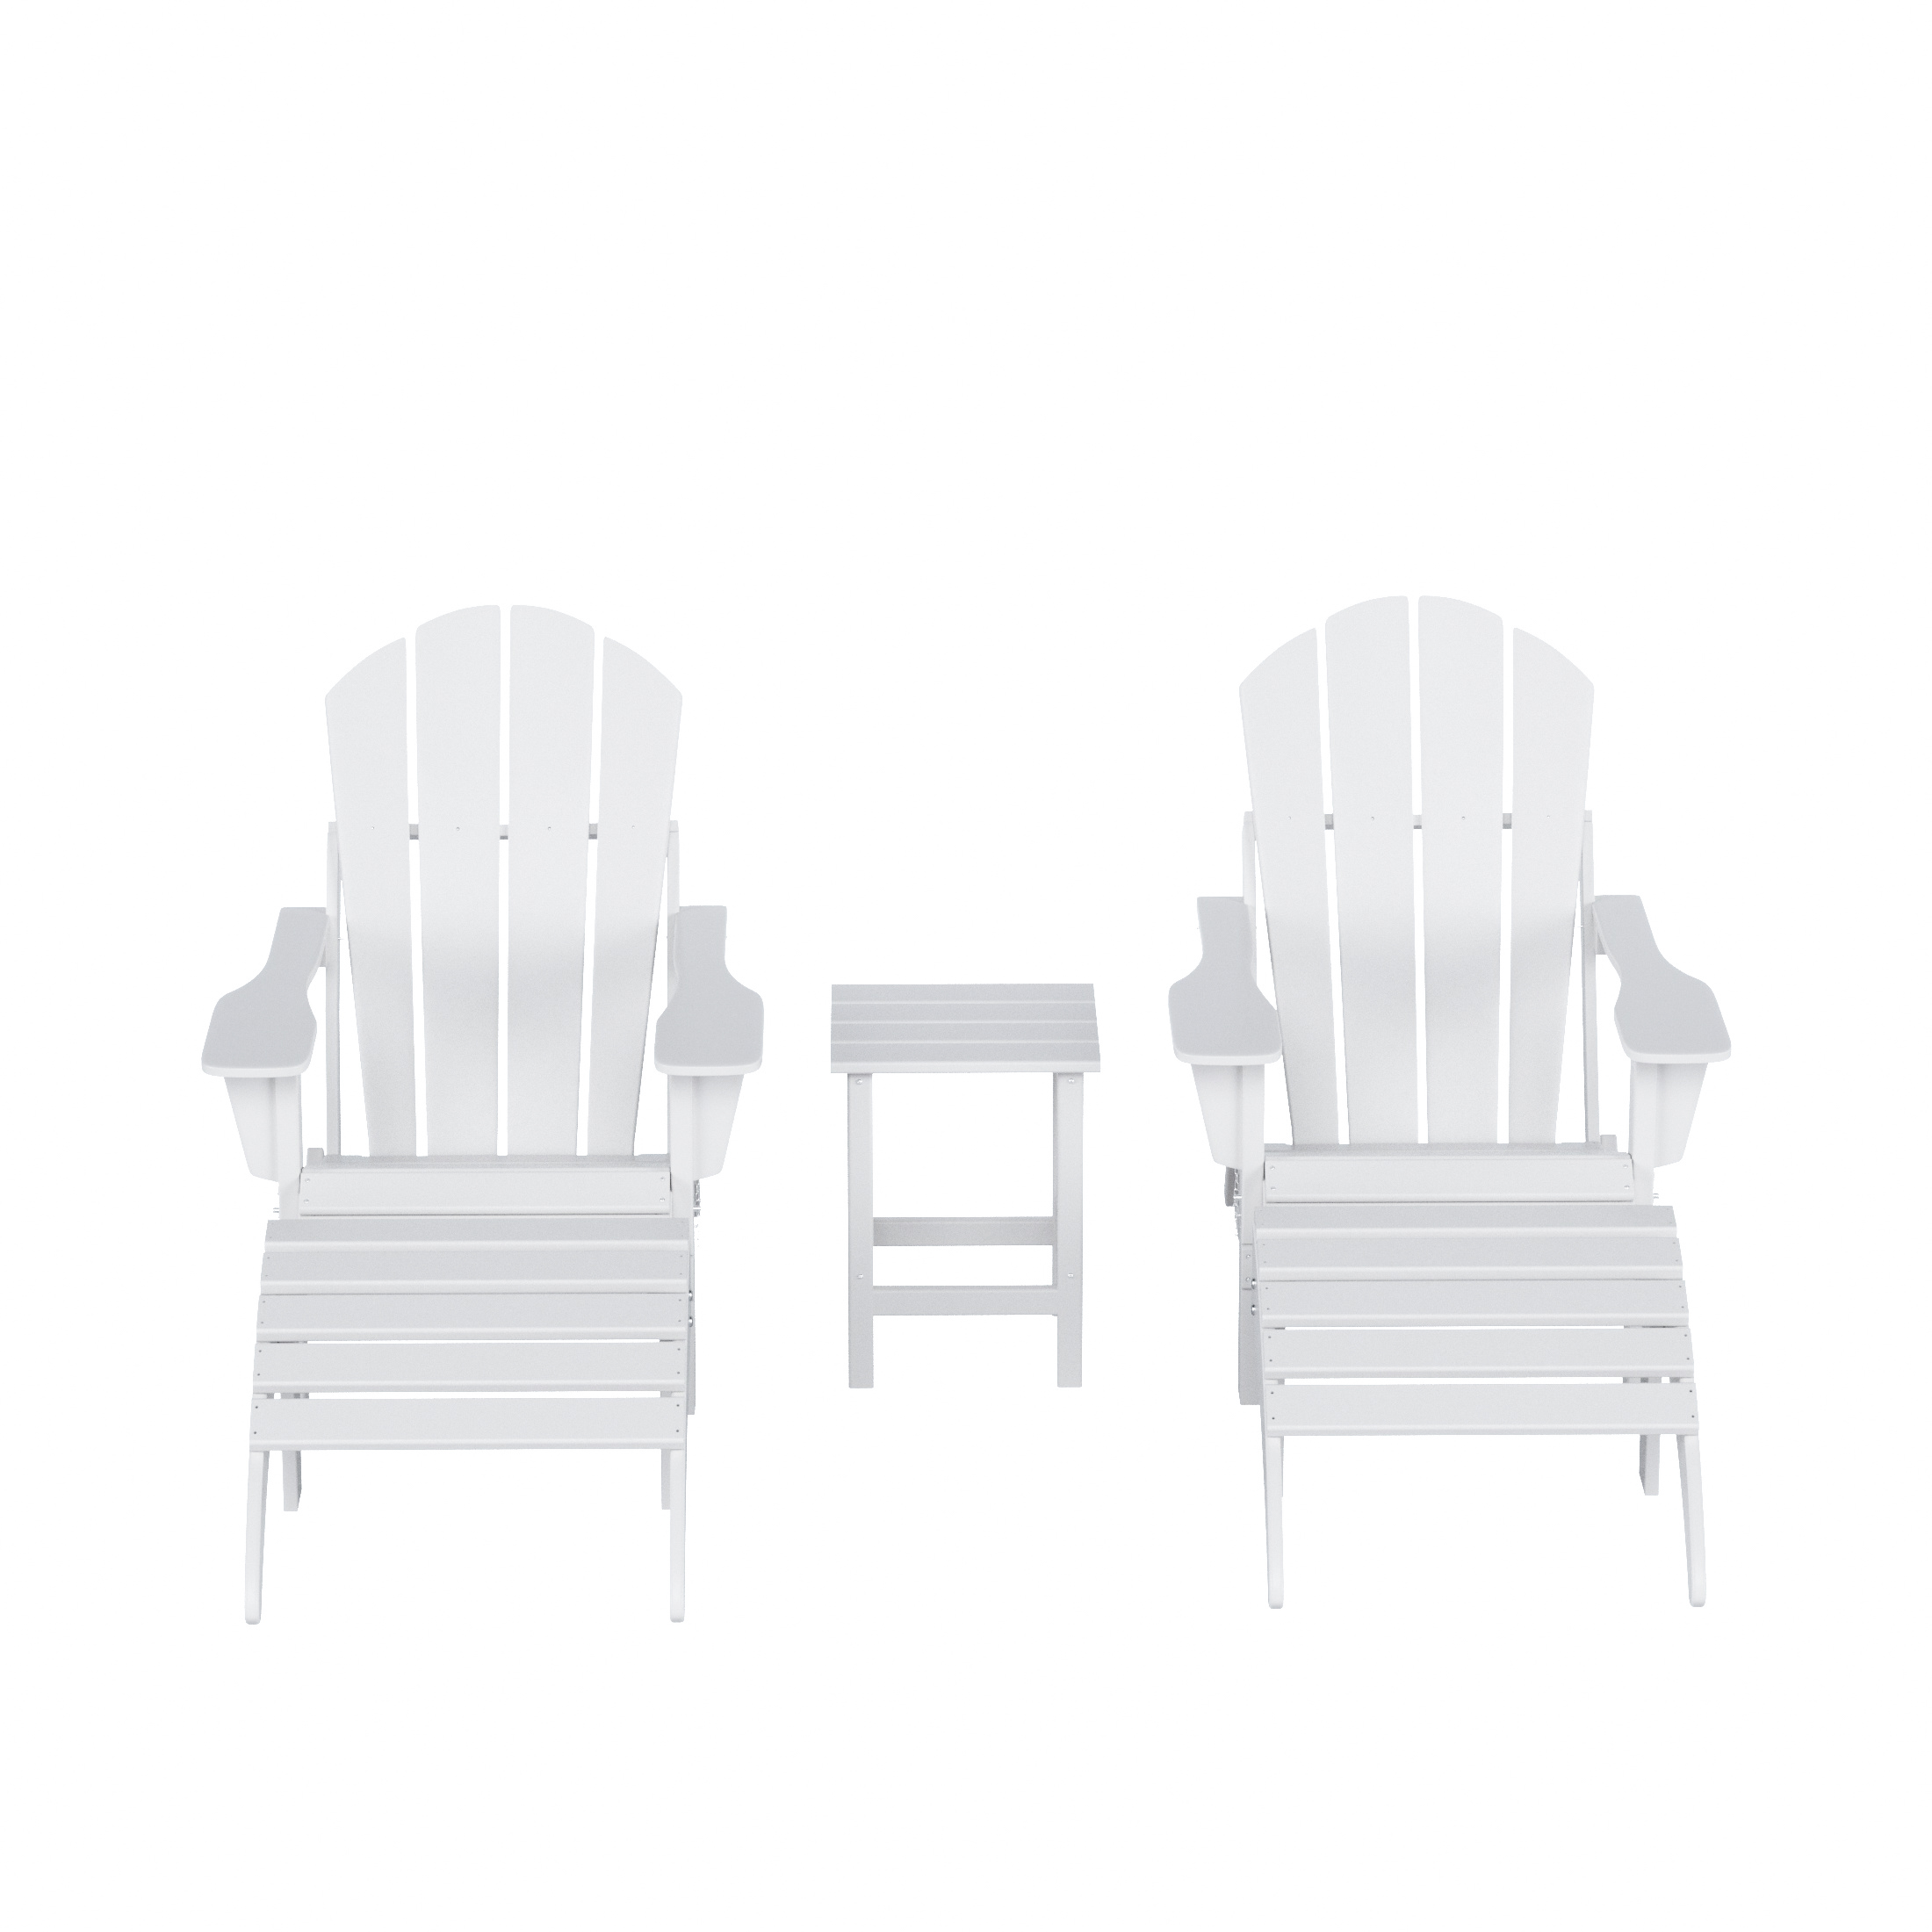 WestinTrends Malibu Outdoor Lounge Chairs Set, 5-Pieces Adirondack Chair Set of 2 with Ottoman and Side Table, All Weather Poly Lumber Patio Lawn Folding Chair for Outside, White - image 3 of 7